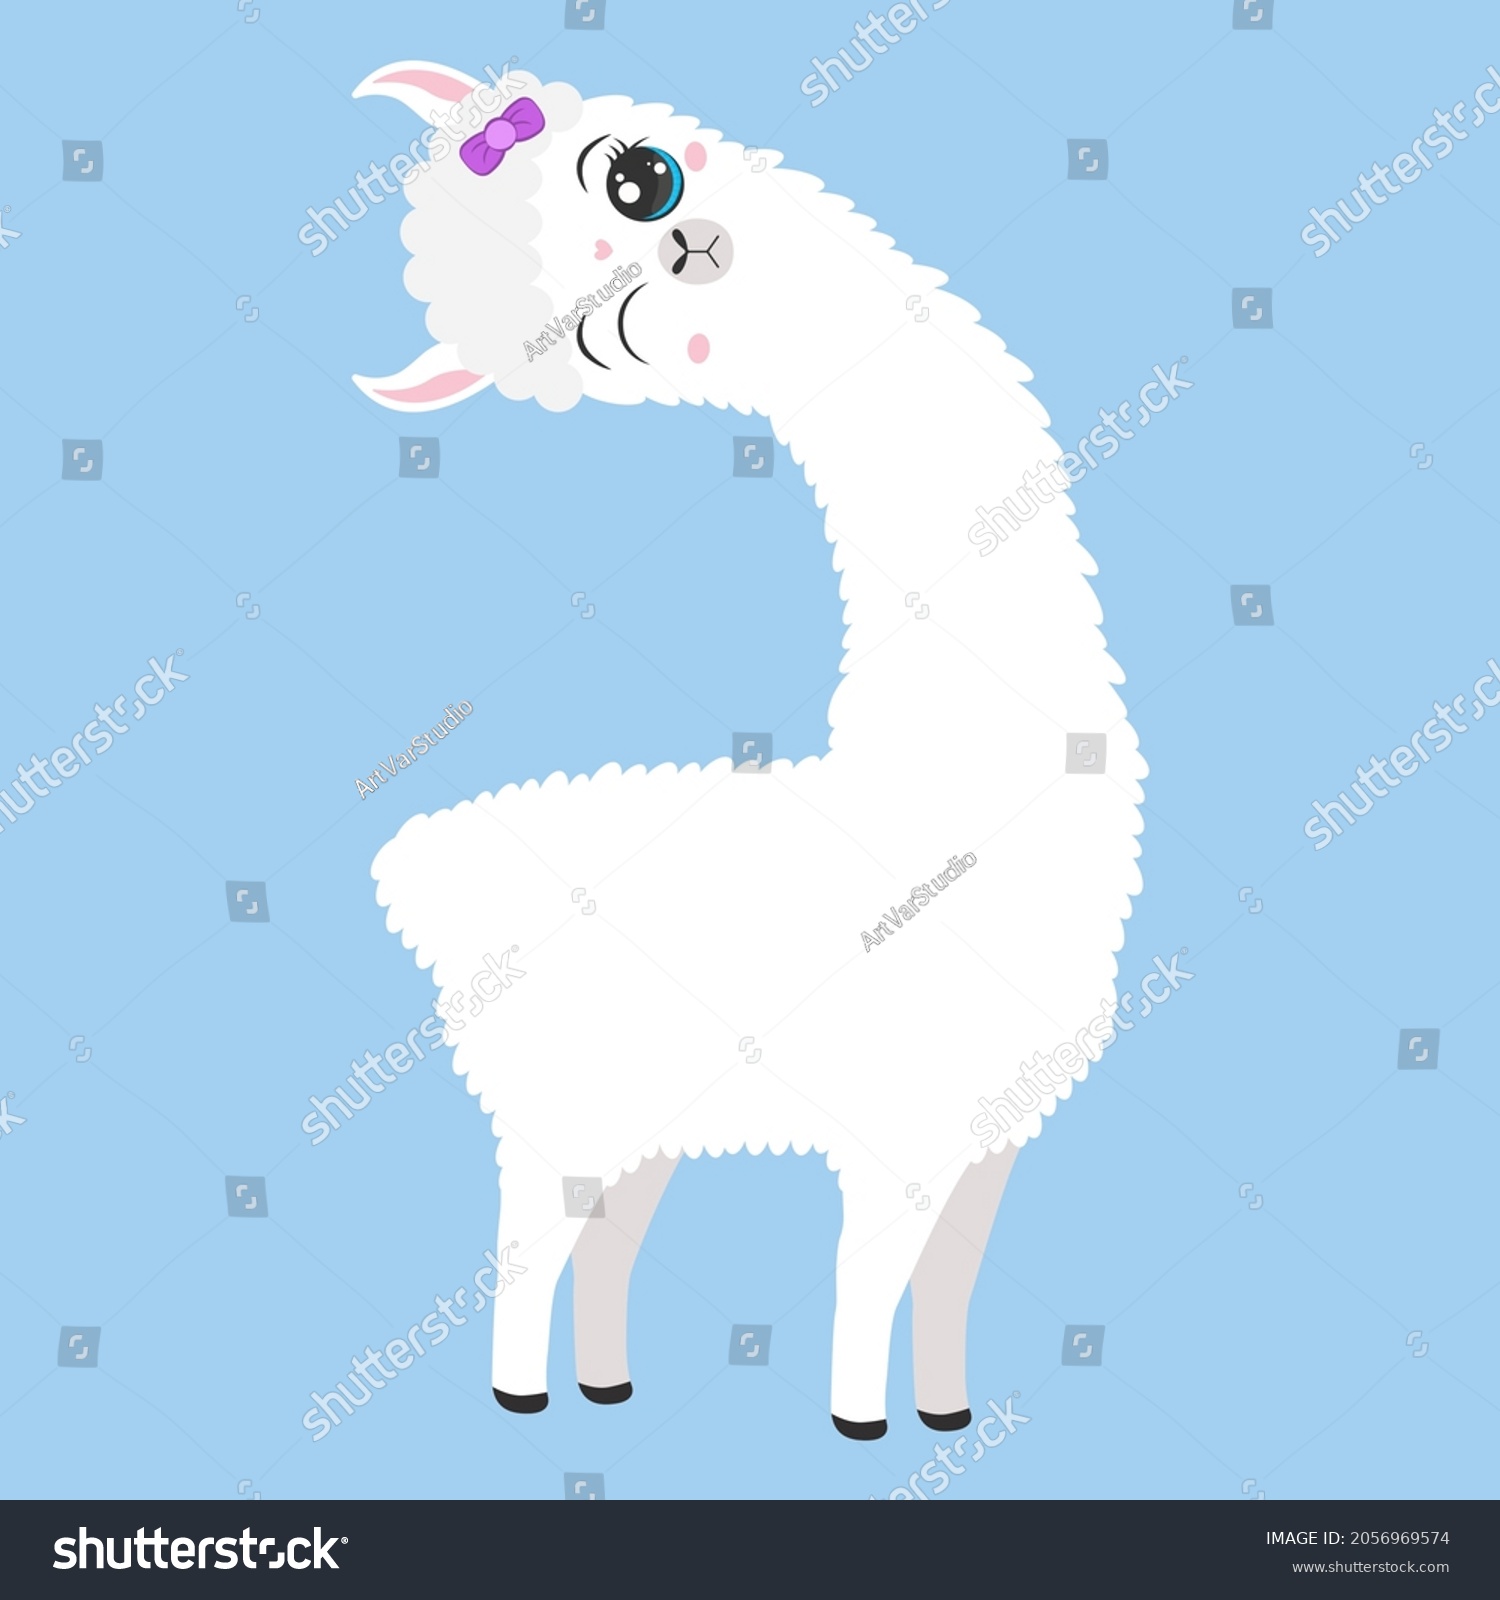 SVG of Clip art llama. Vector illustration of baby llama for nursery room decor, posters, greeting cards and party invitations. Cute animal illustrations svg